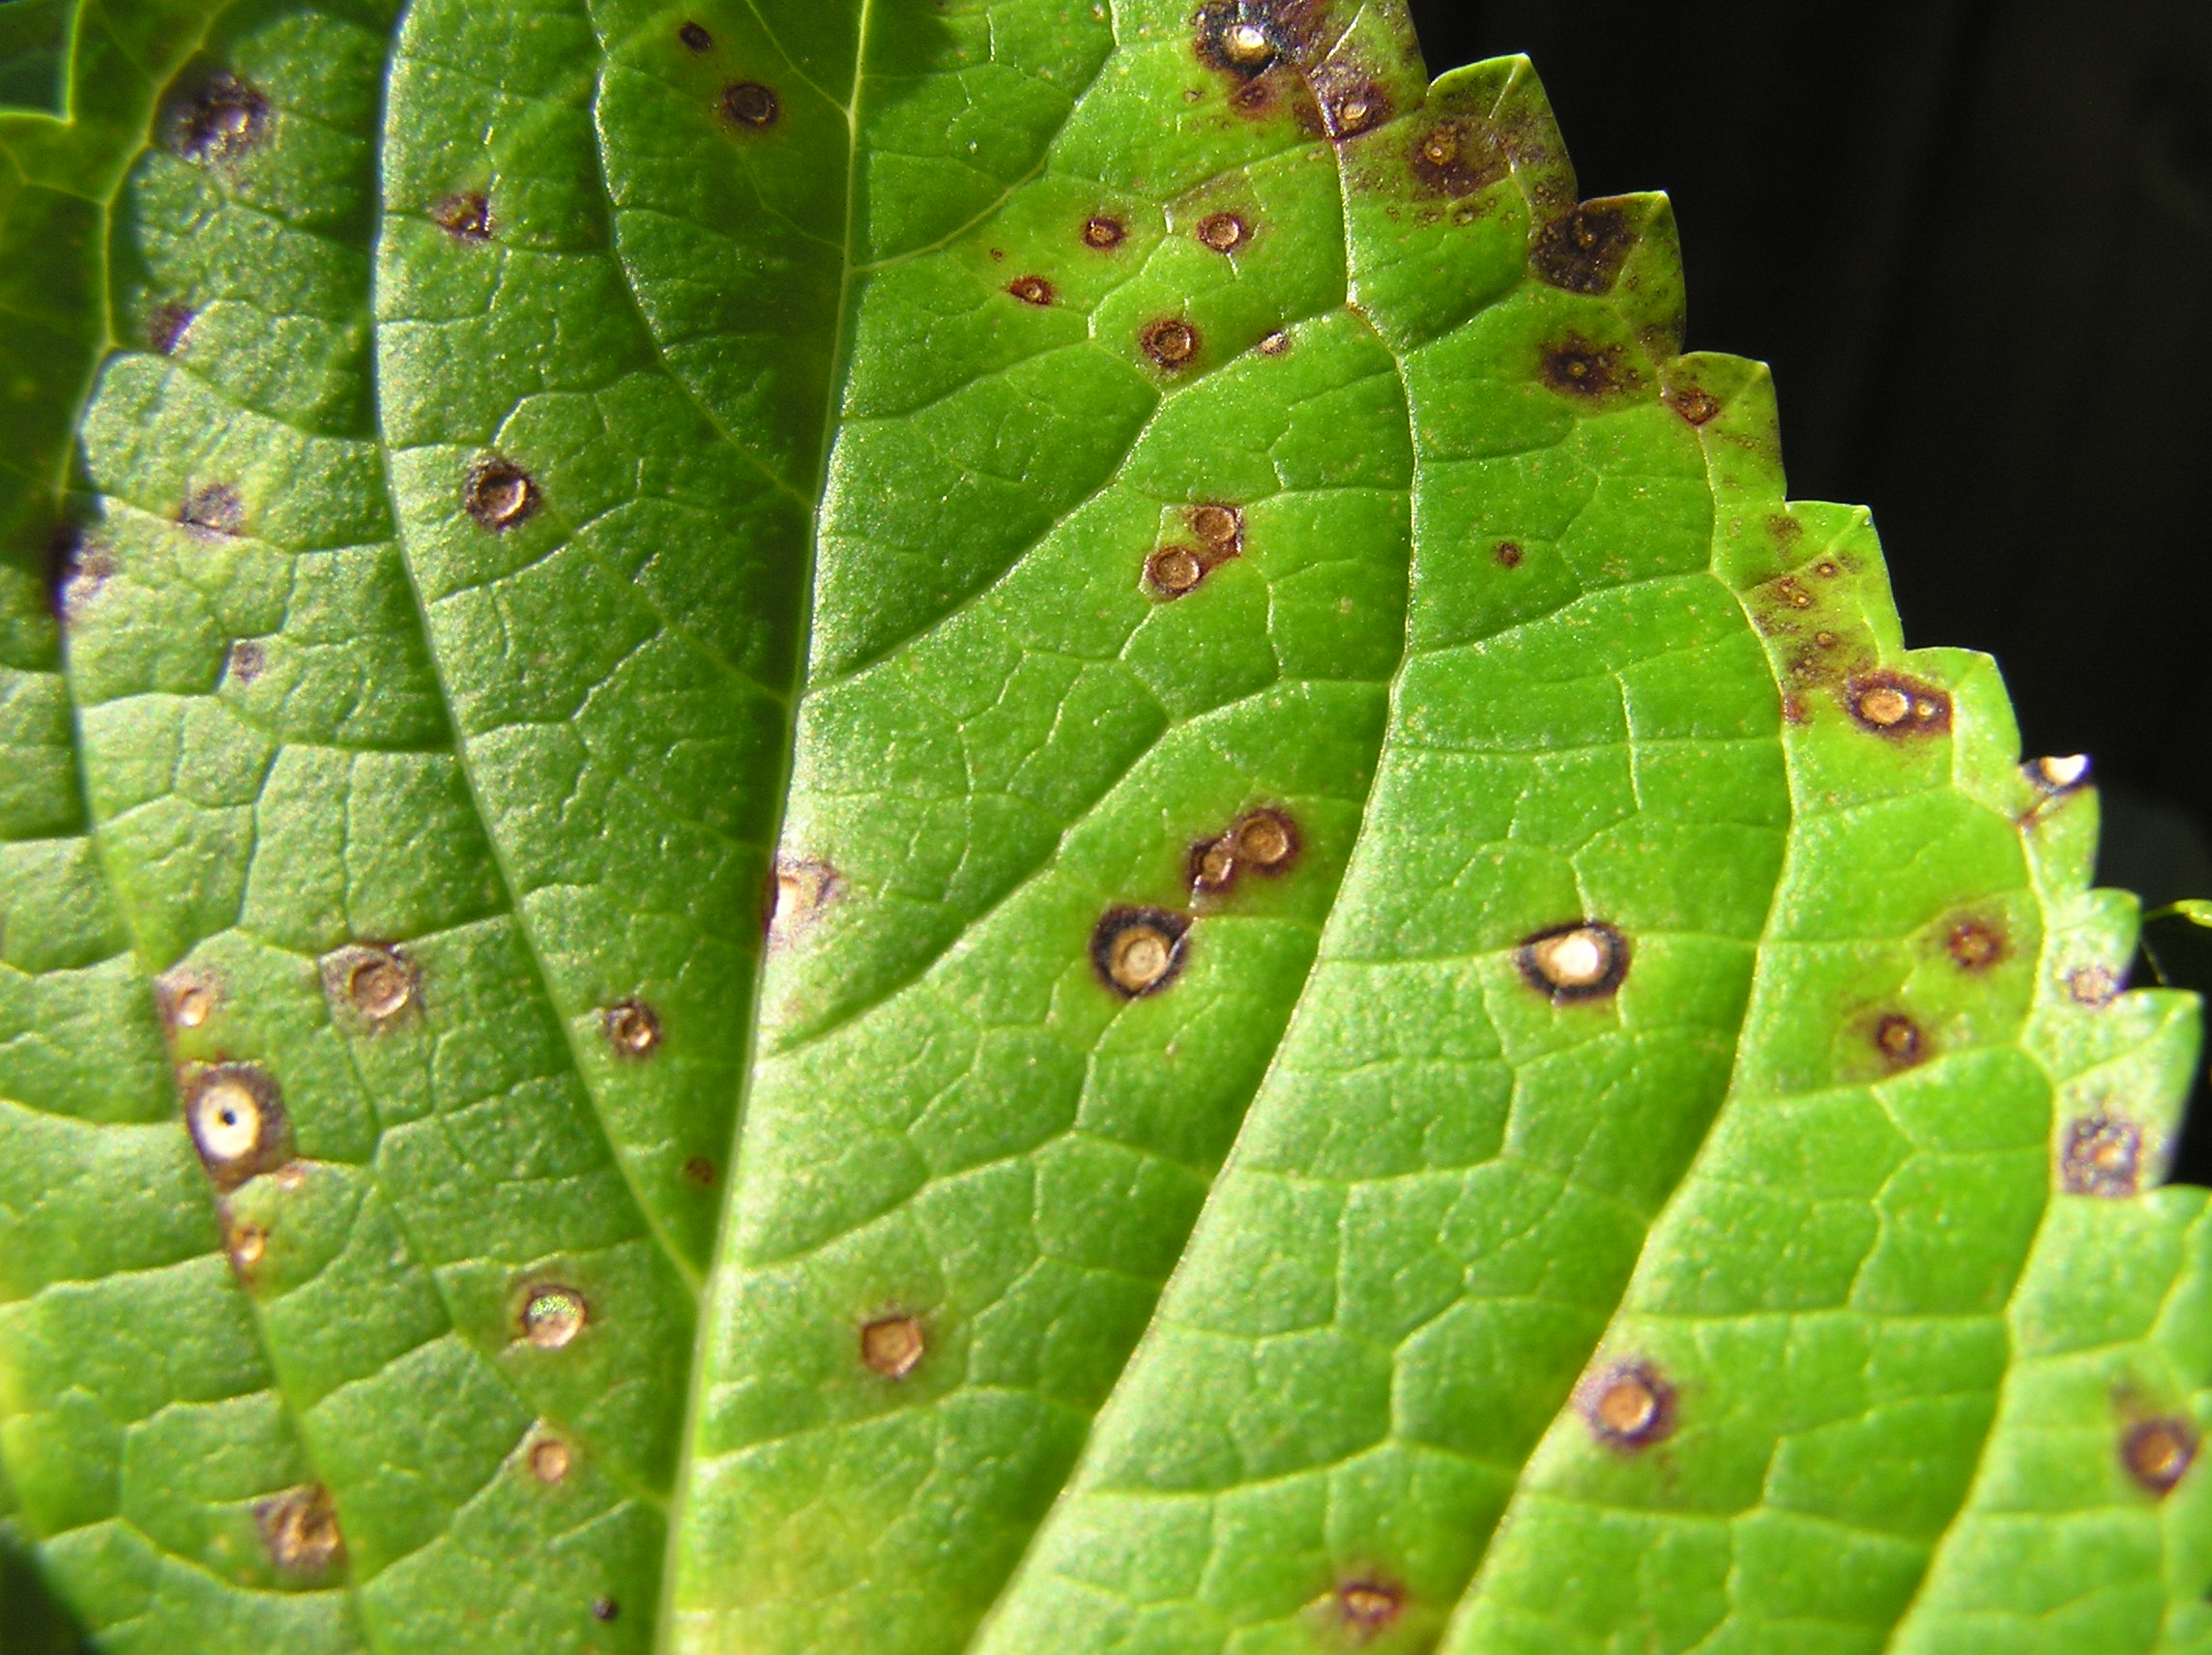 Leaf spots may mean a fungal disease | Gardening in the Panhandle